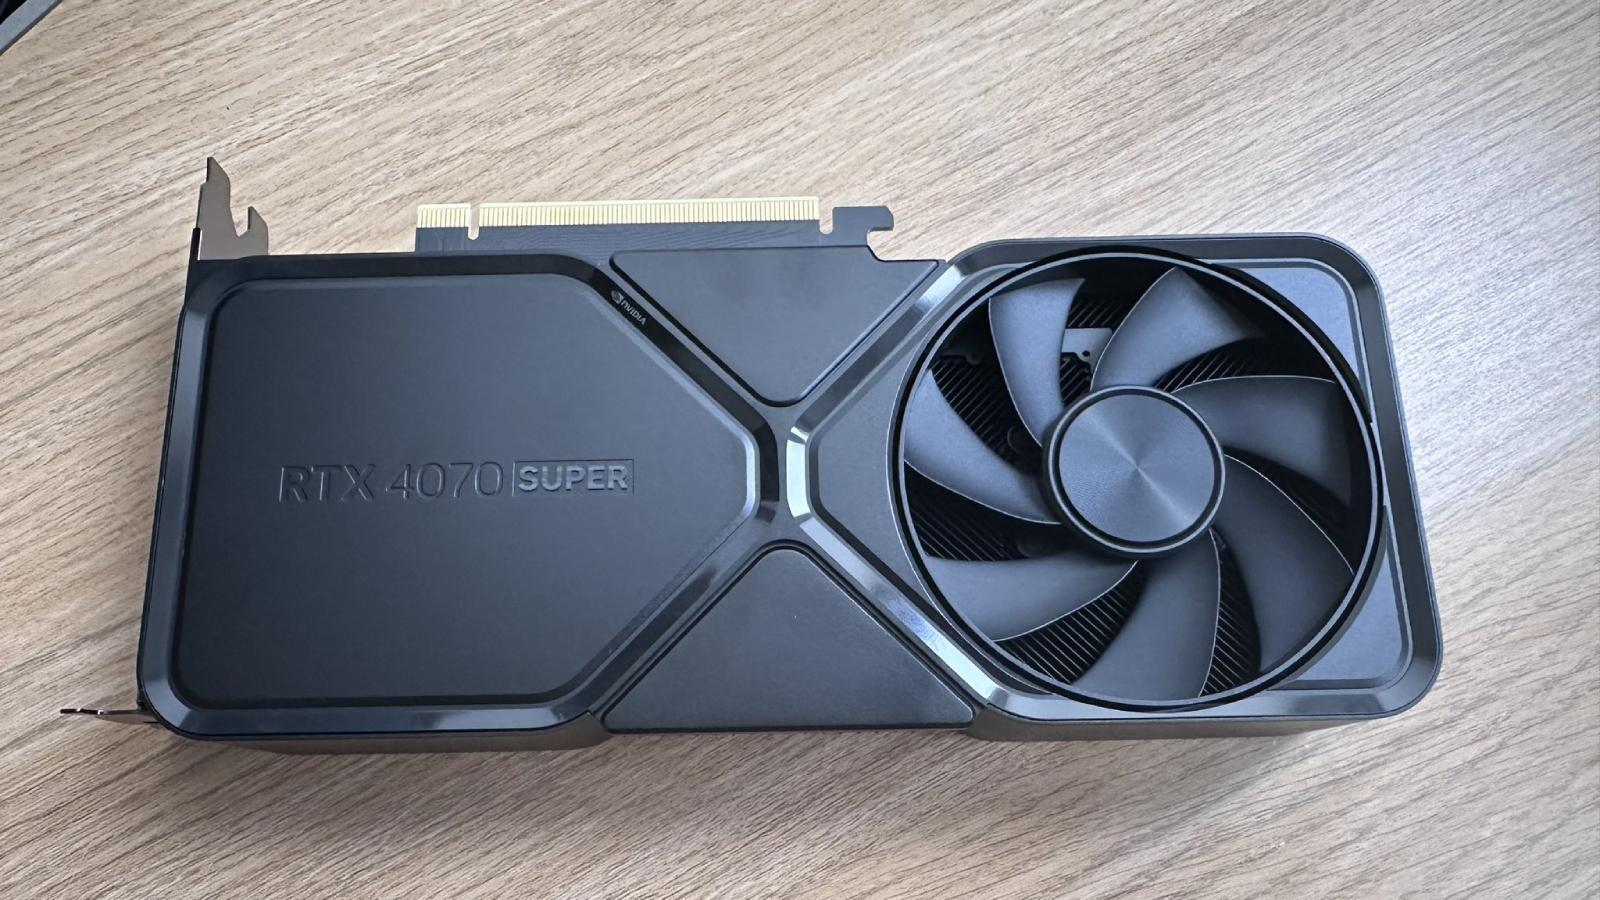 Mistakes Were Made, RTX 4070 Ti Super Review Update 